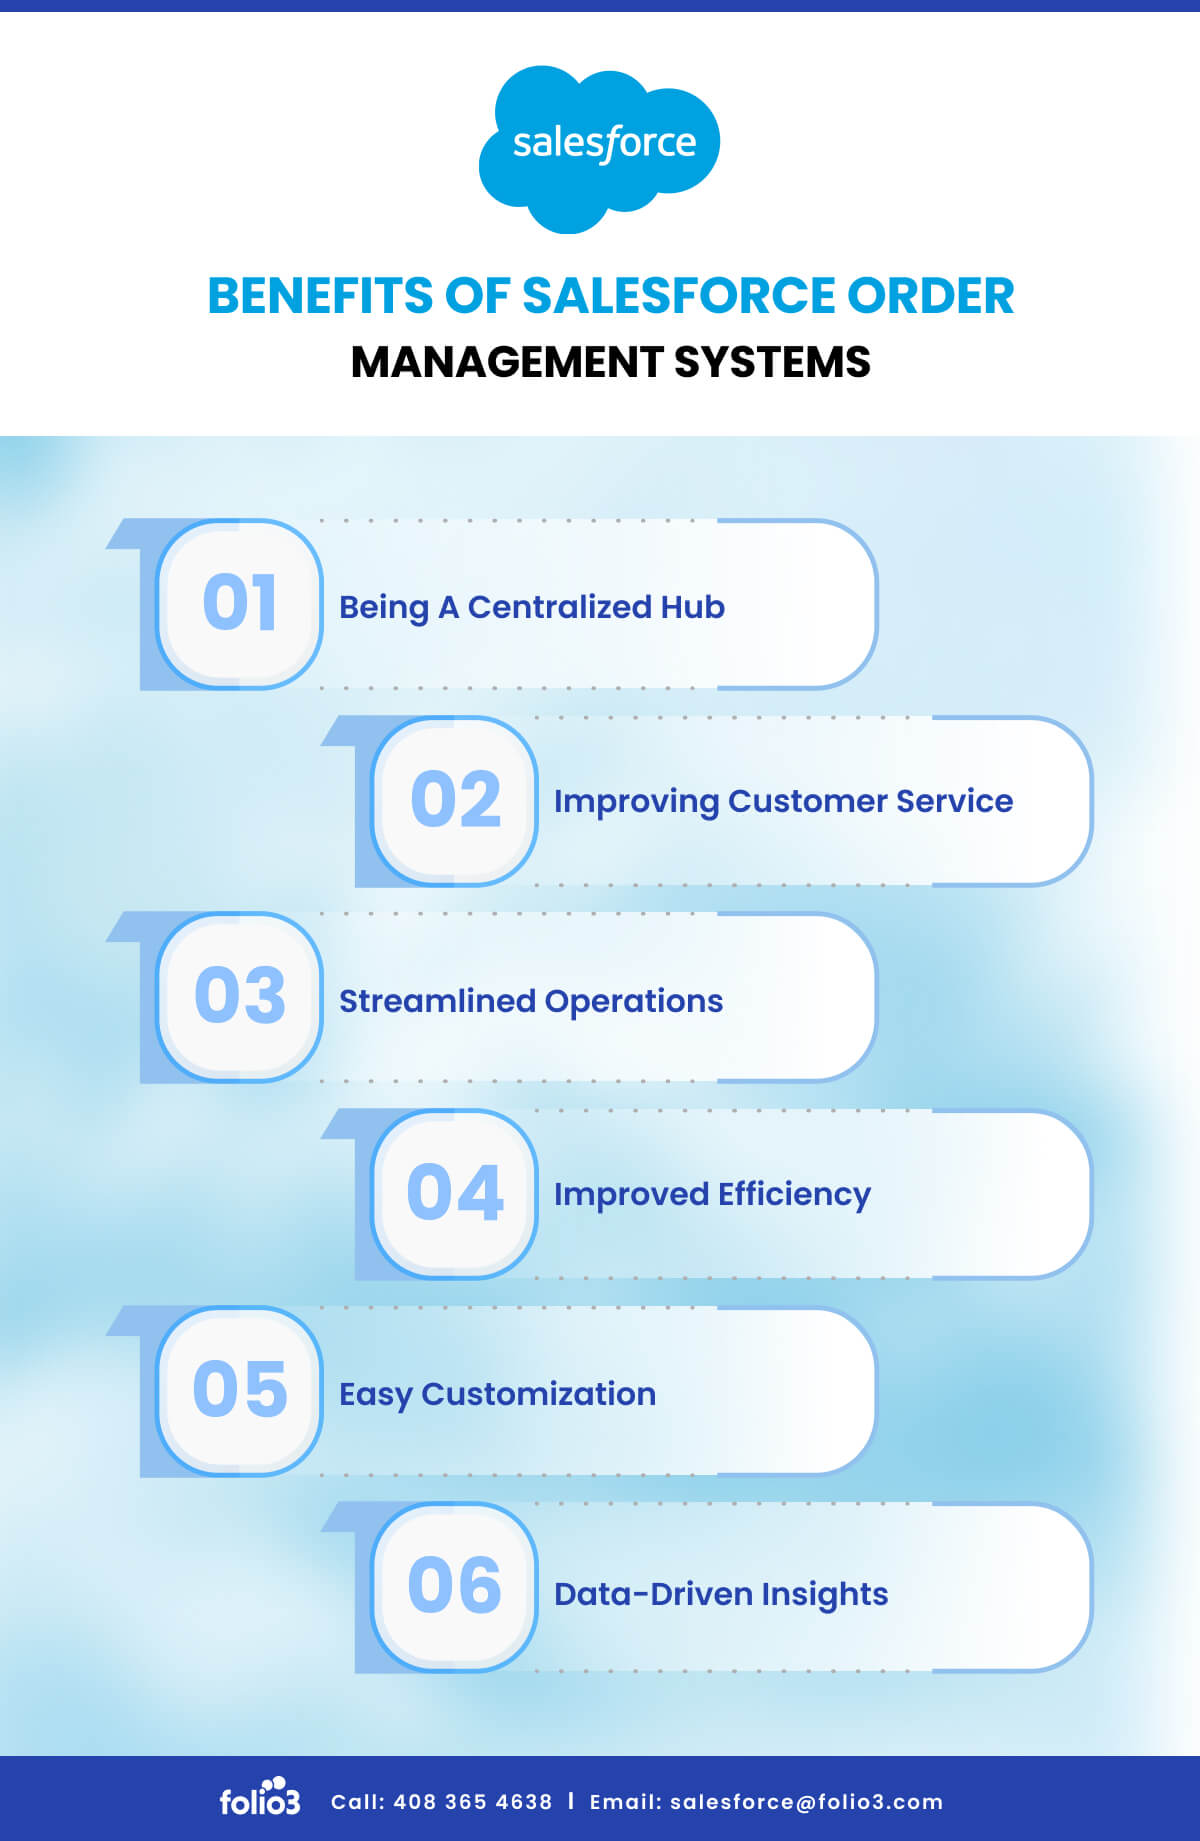 Benefits of Salesforce Order Management Systems